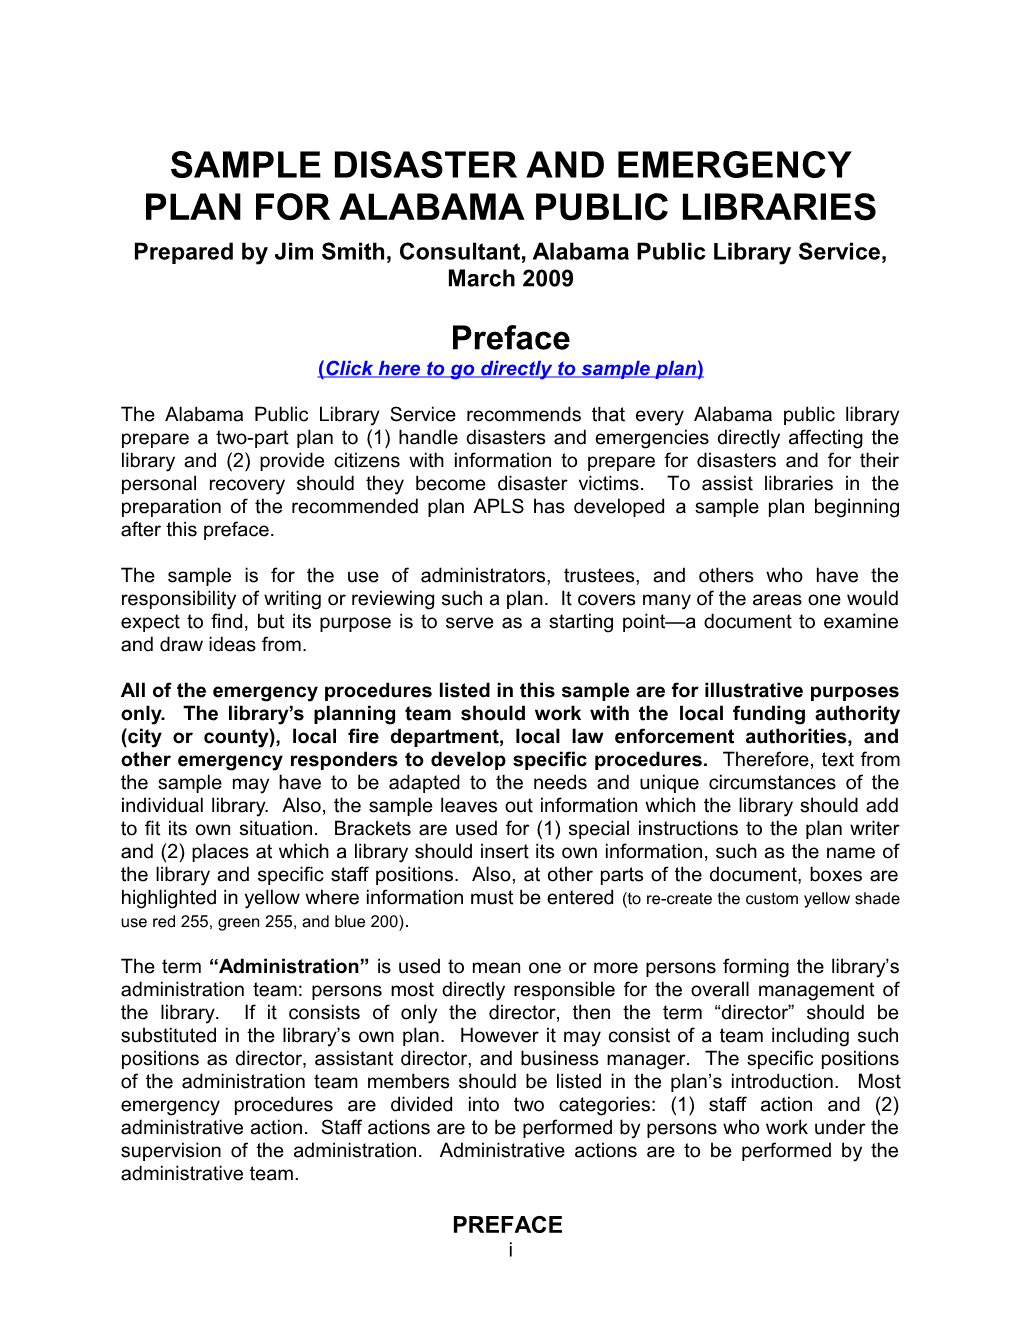 Sample Disaster and Emergency Plan for Alabama Public Libraries